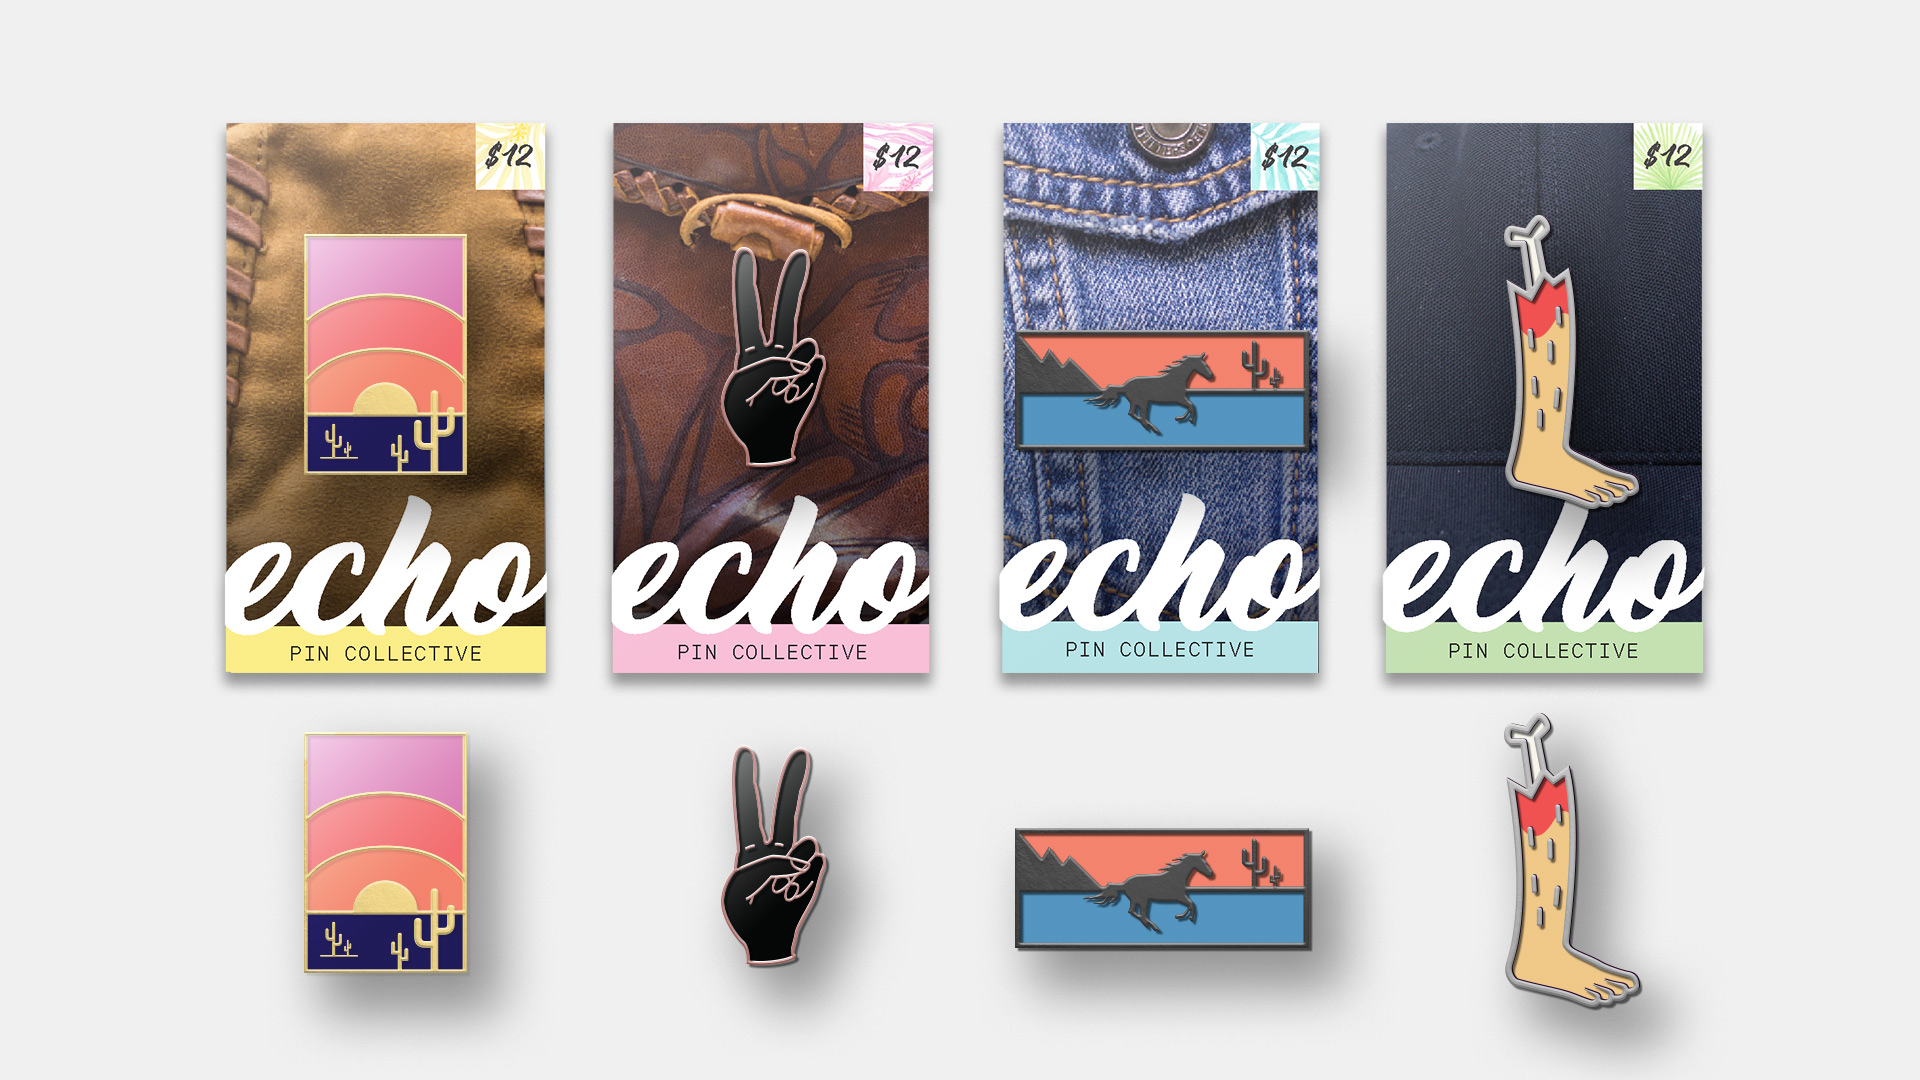 Cheyenne Manning | Packaging, Design, Identity | Echo Pin Collective, pin design #2 by Rachel Sanvido and #4 by Austin Legg